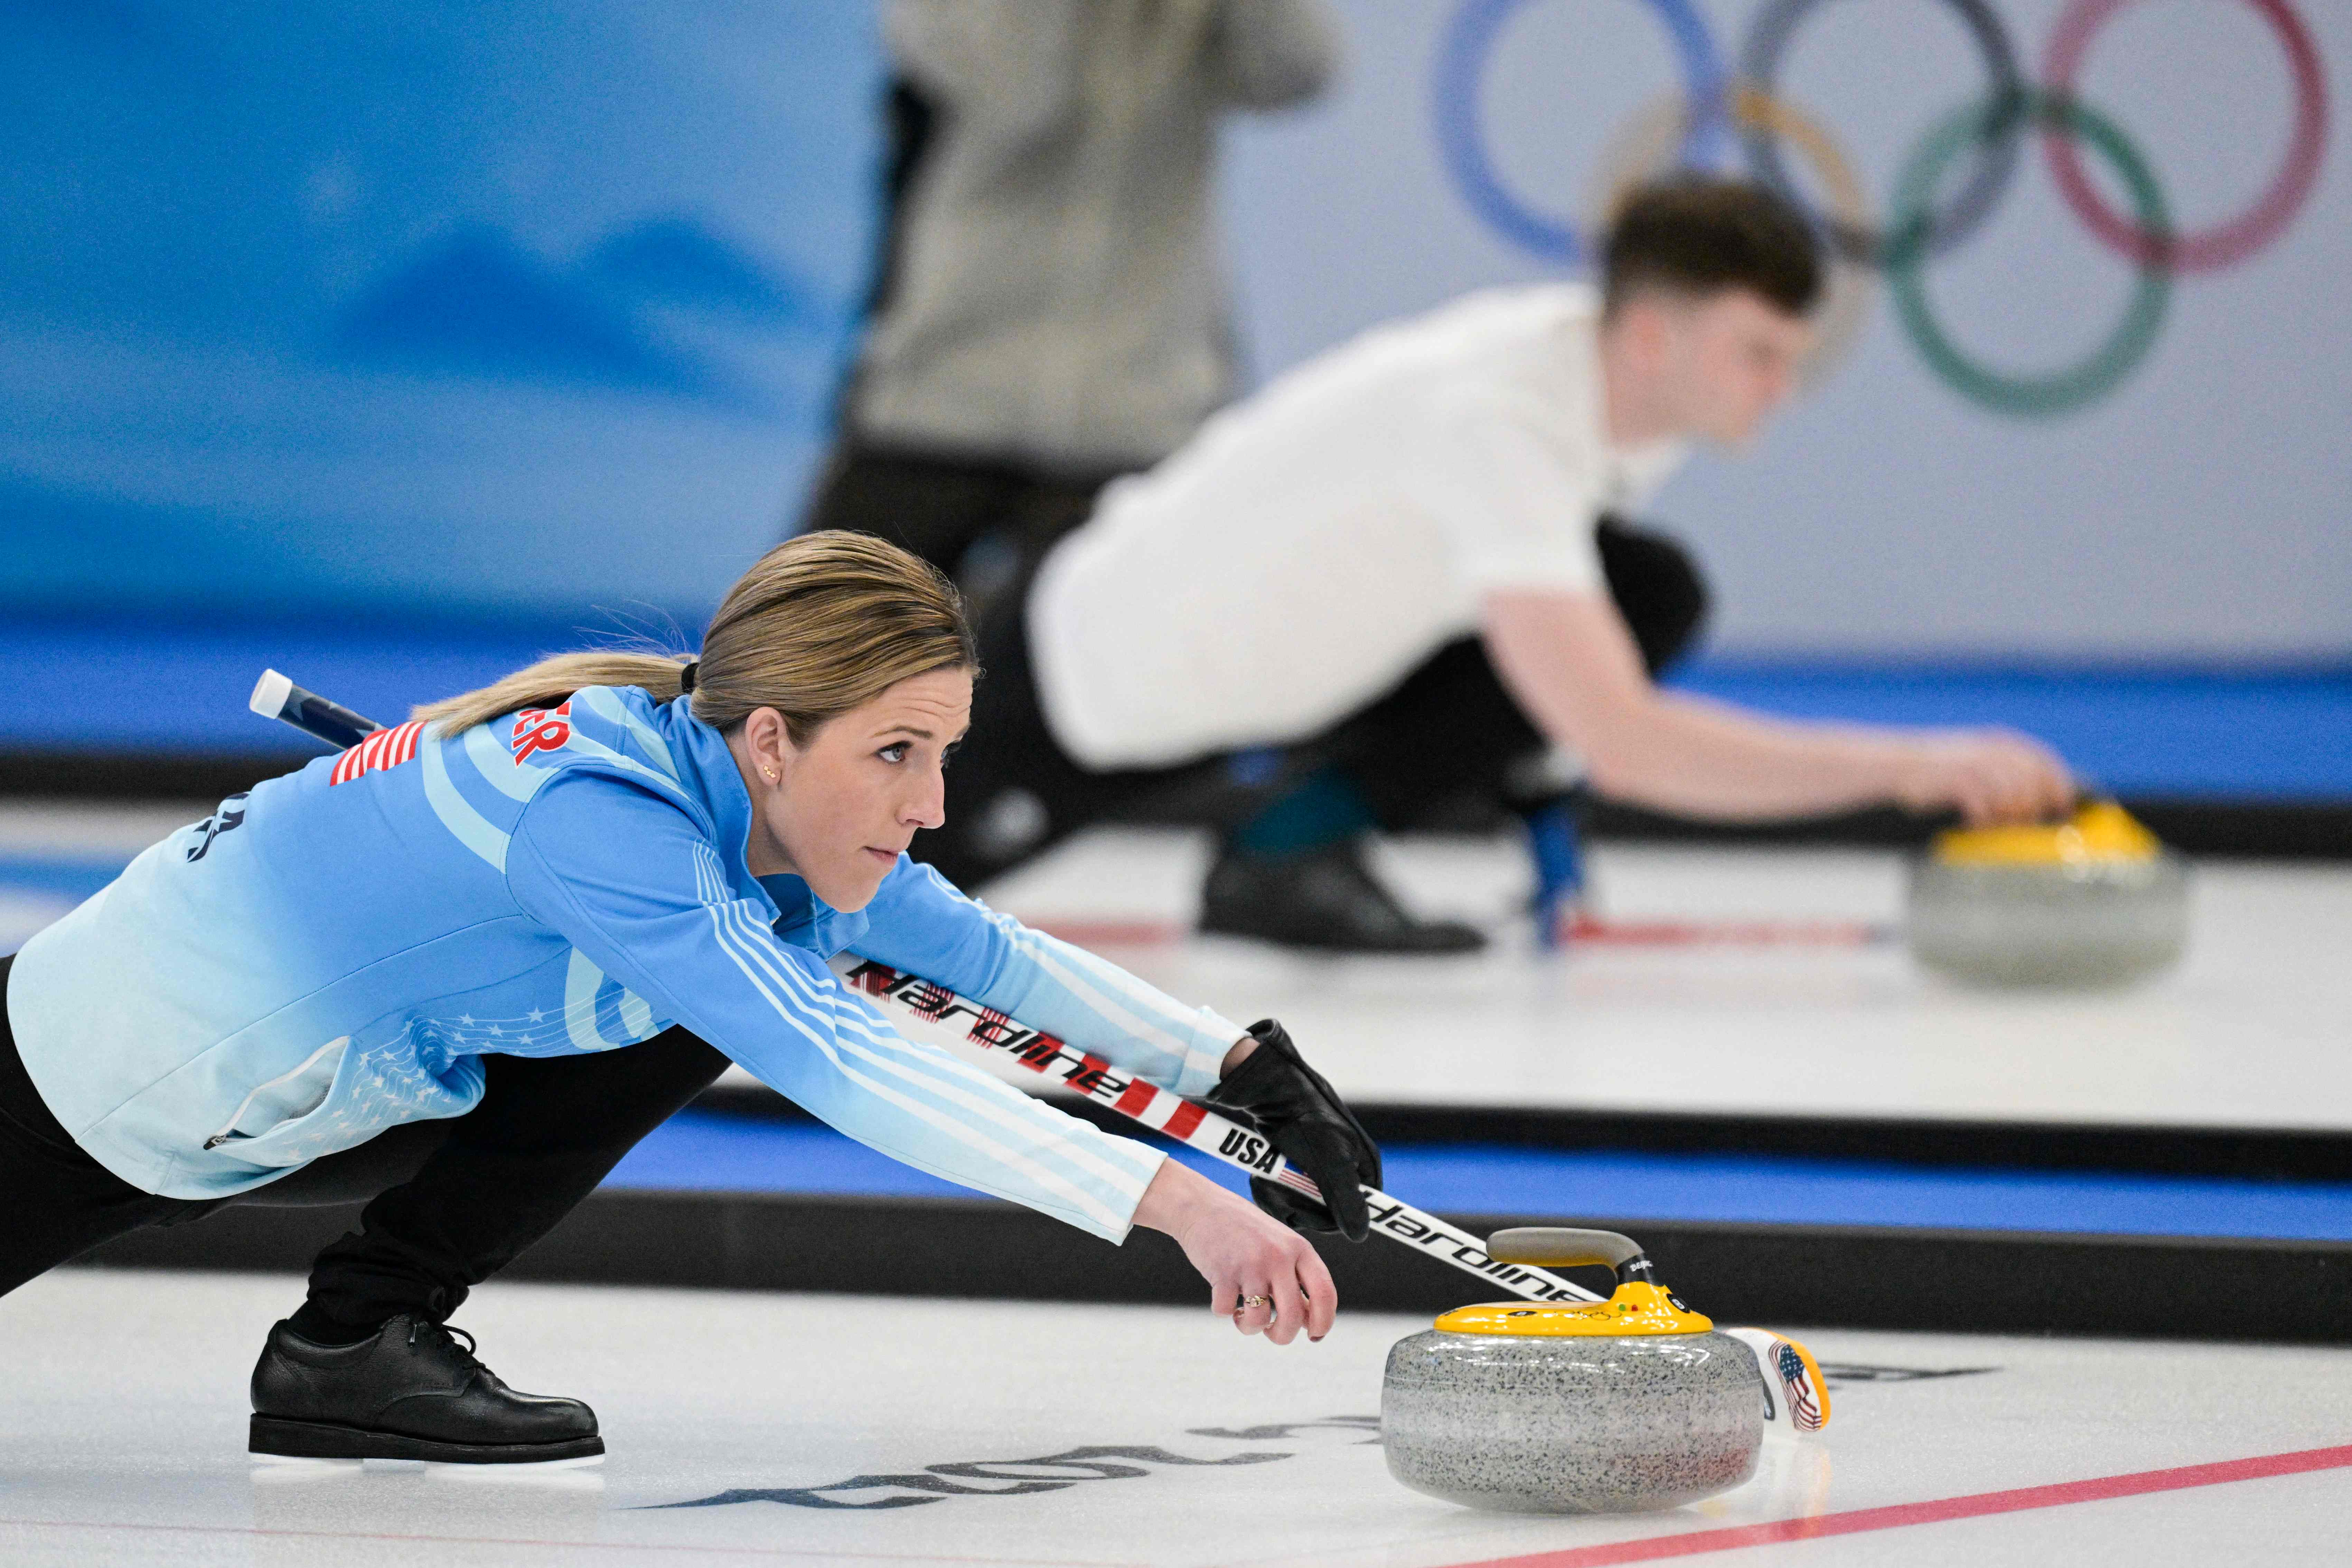 22 Winter Olympics Curling At The Ice Cube Kicks Off Beijing Games